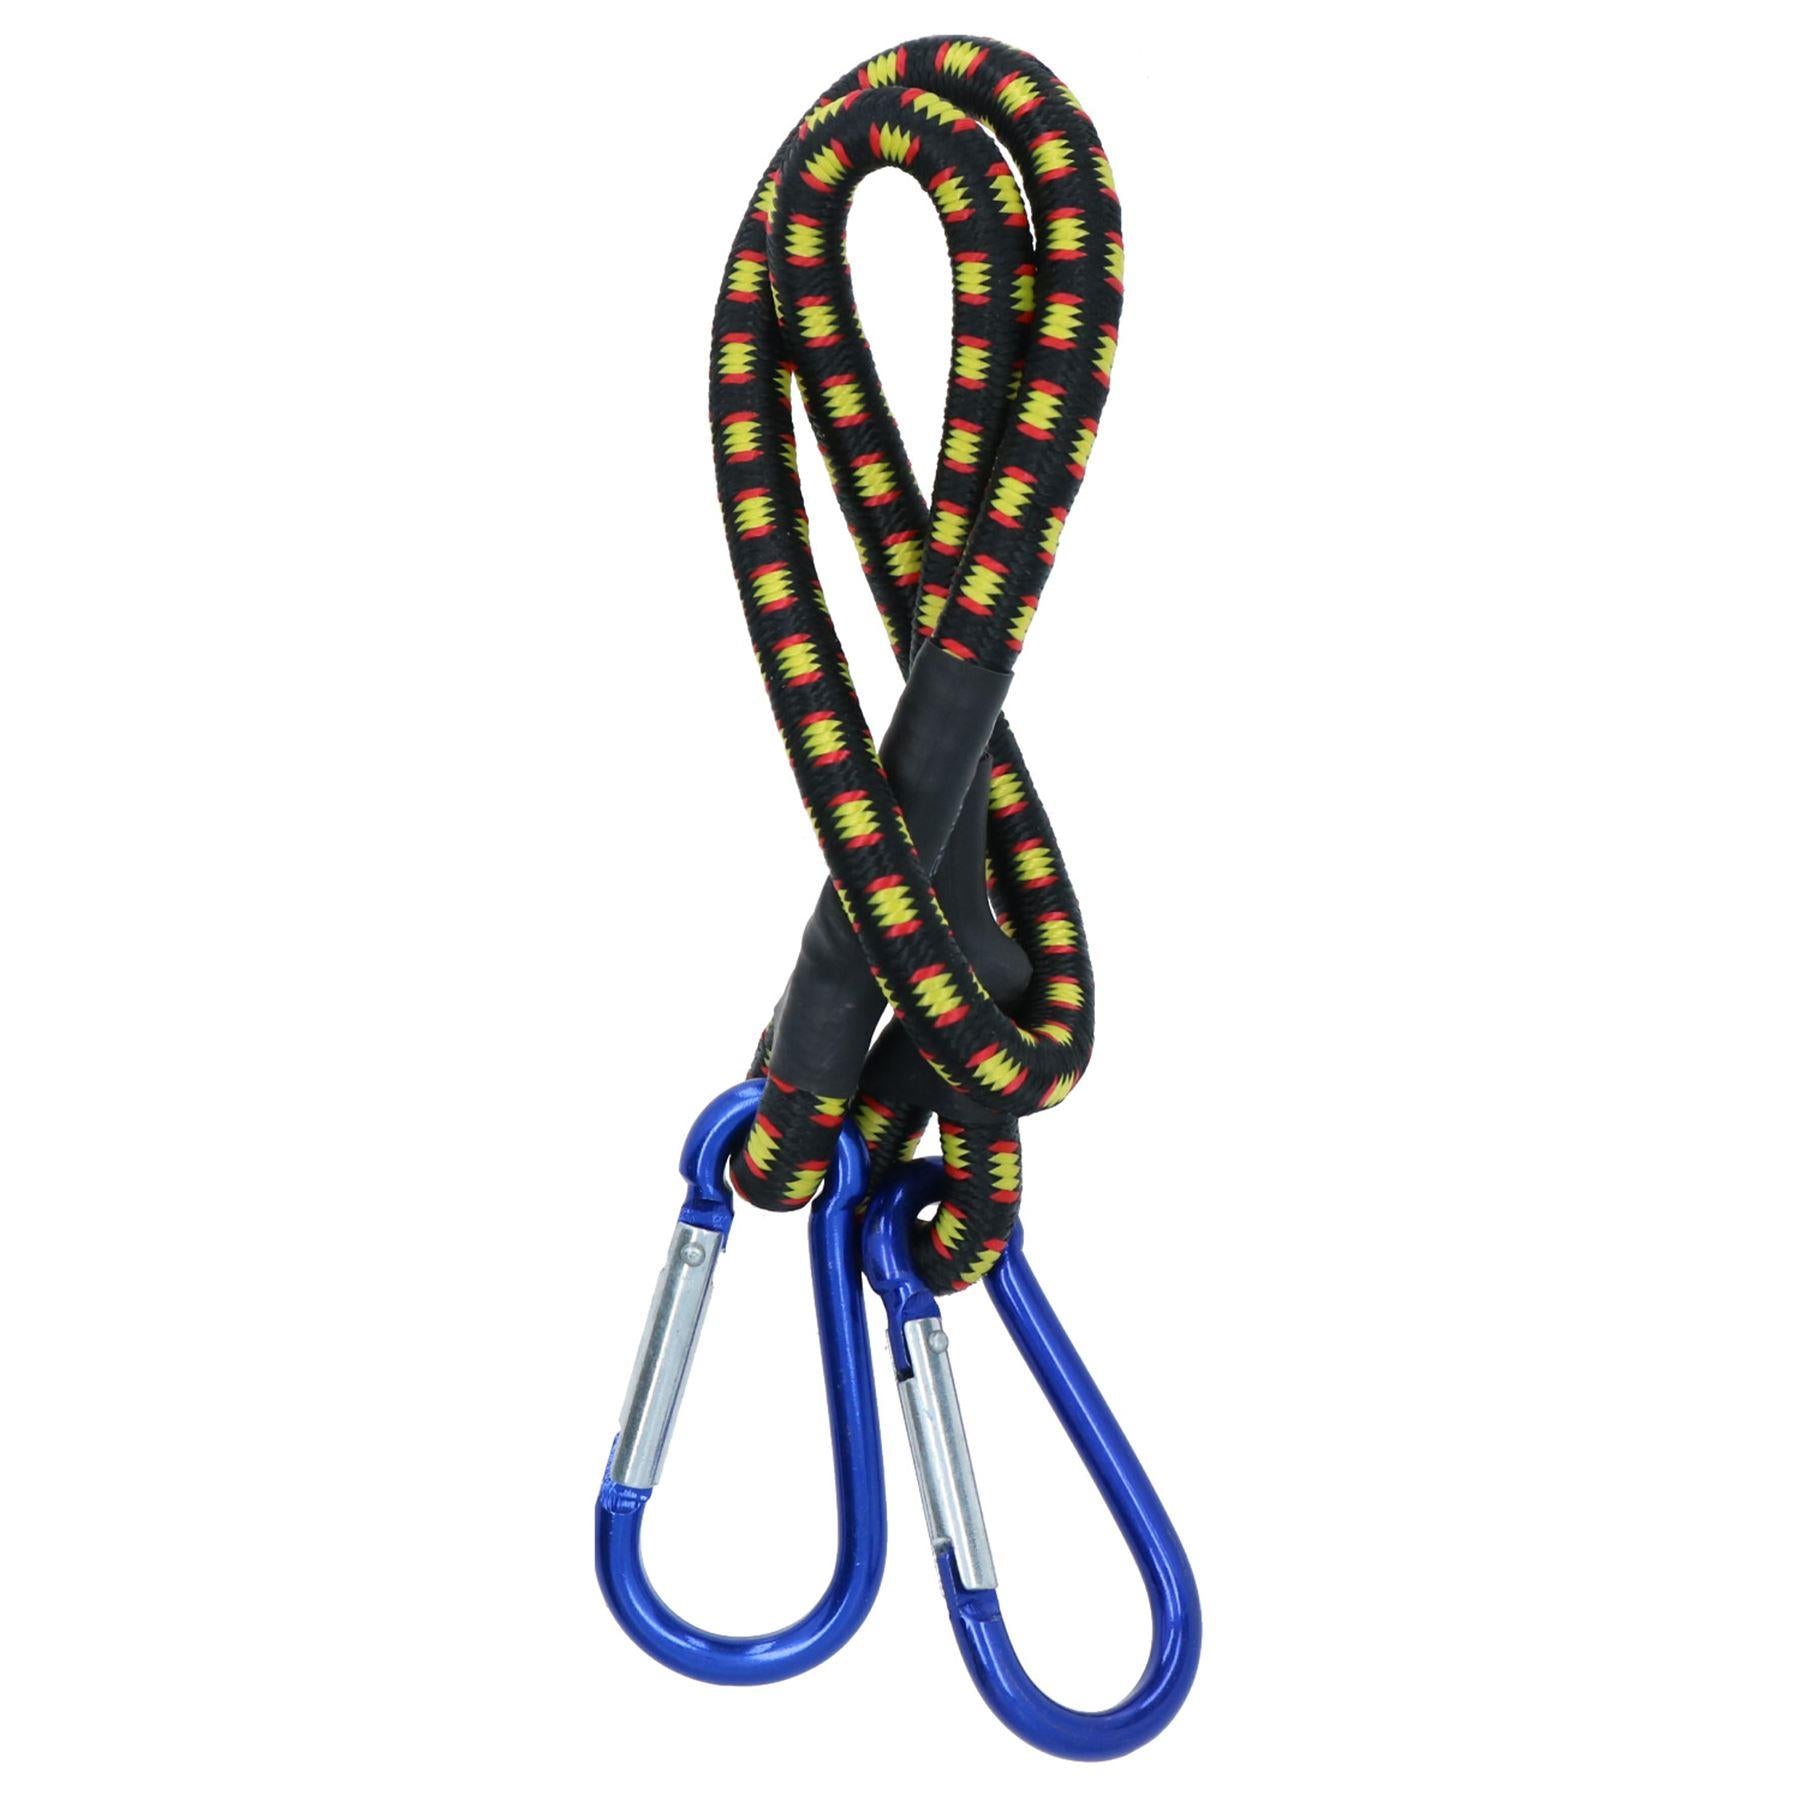 24” Bungee Strap with Aluminium Carabiners Hook Tie Down Fastener Holder